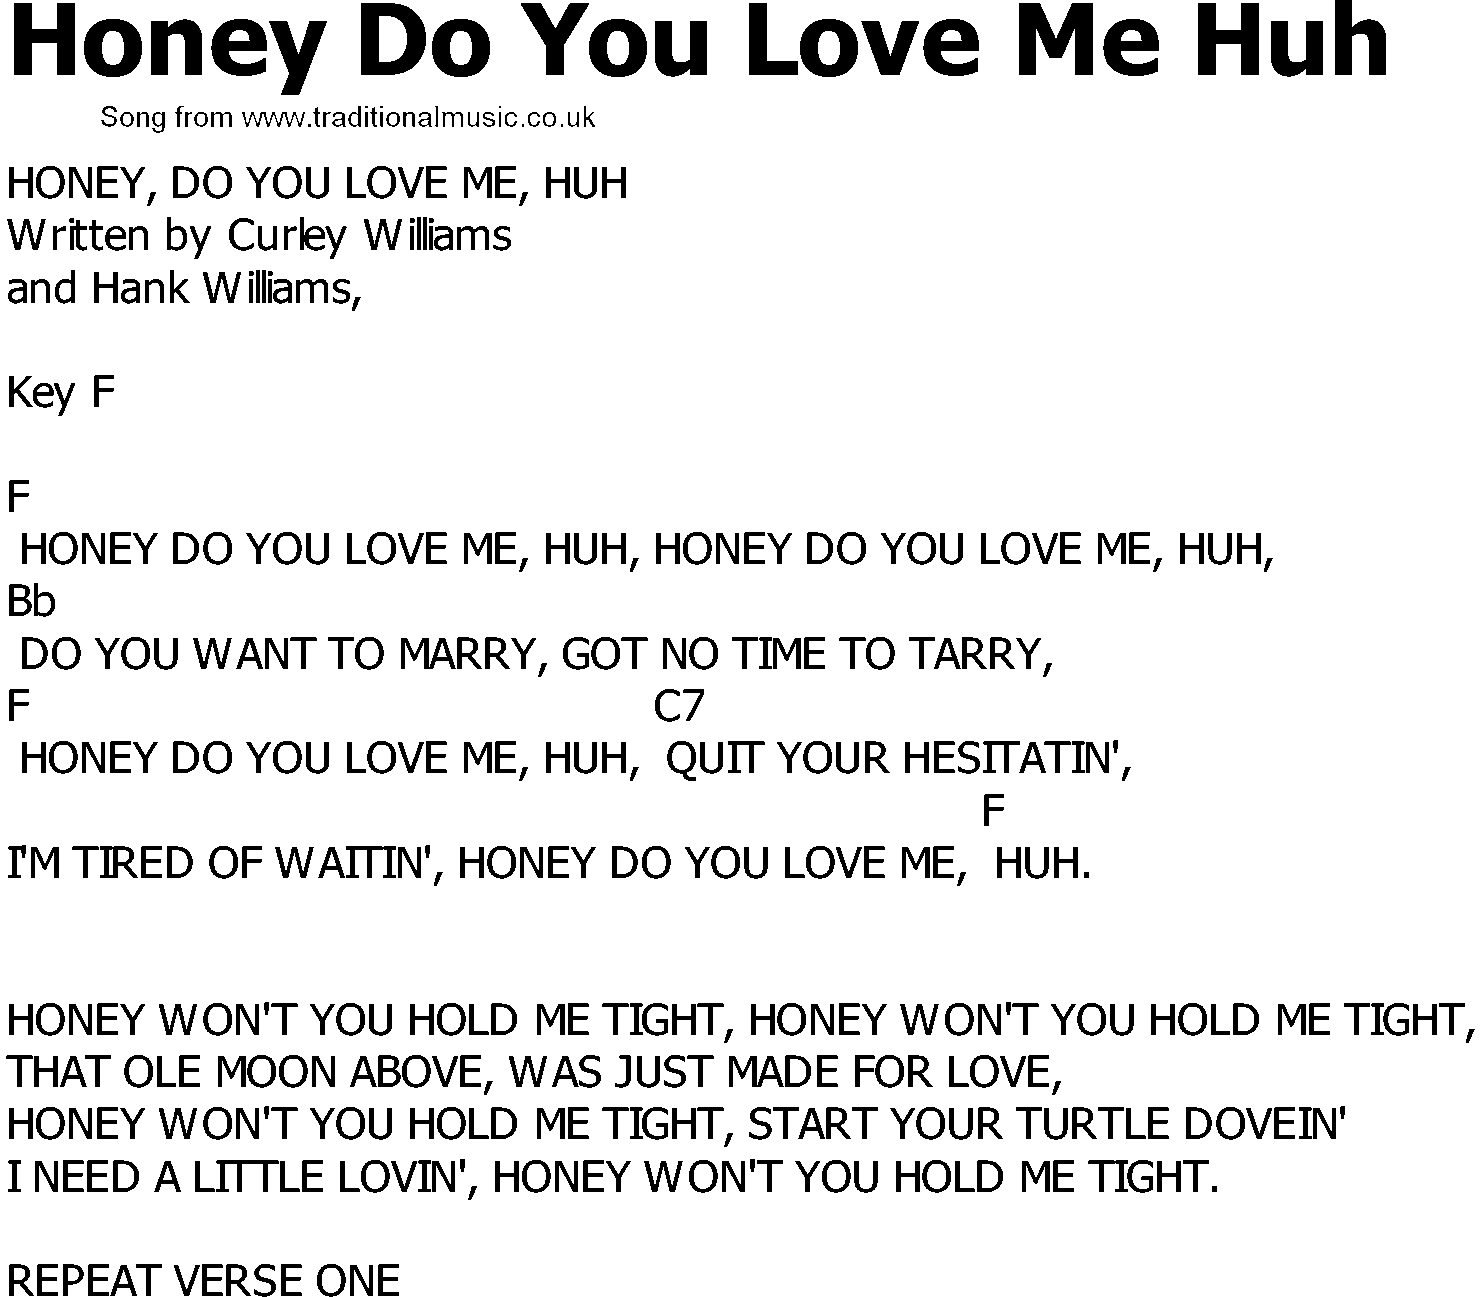 Old Country song lyrics with chords - Honey Do You Love Me Huh